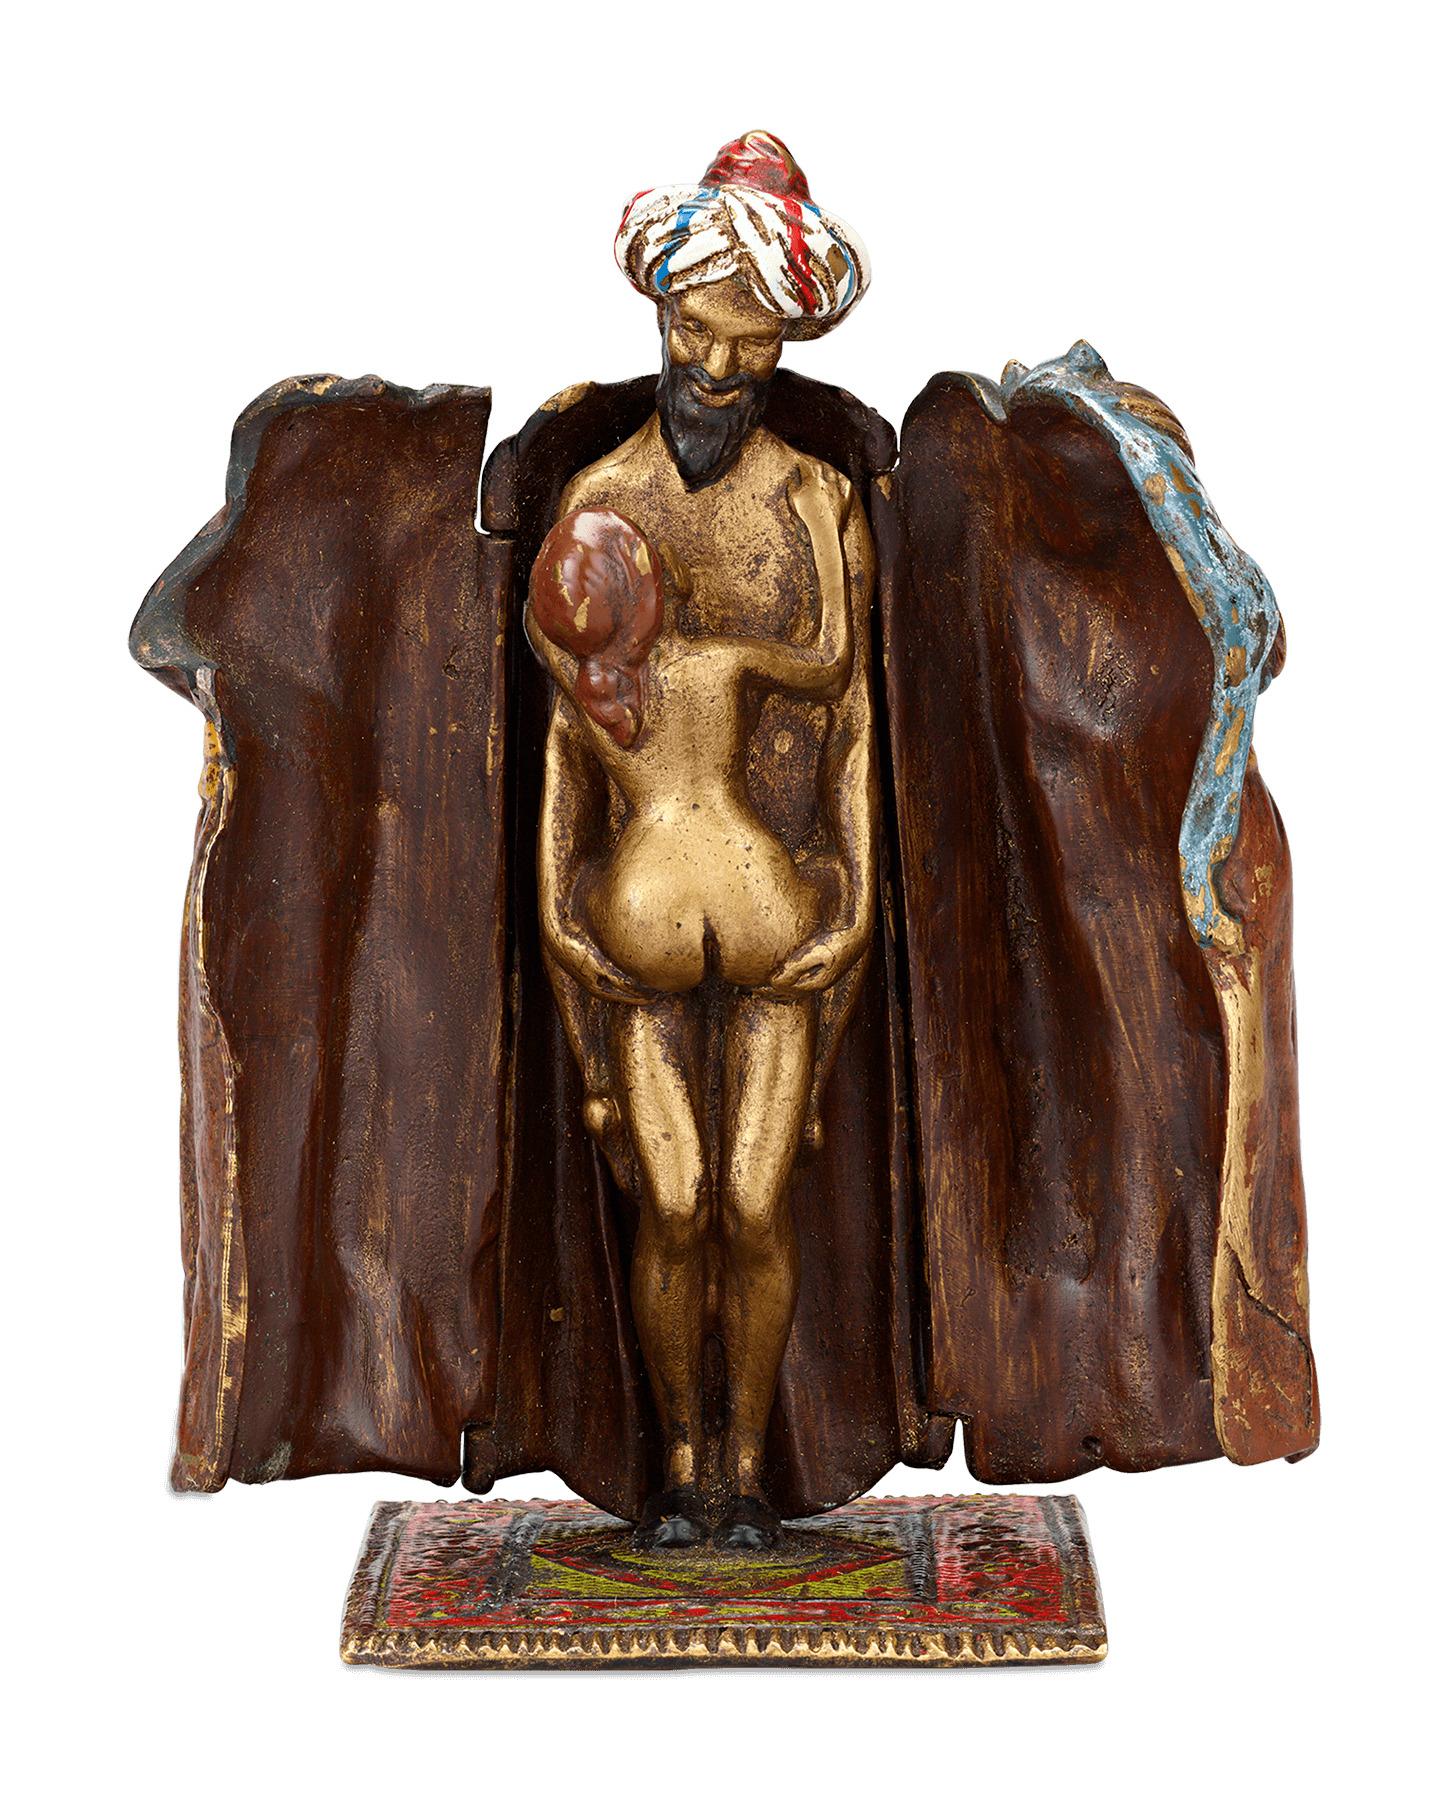 This Austrian cold-painted bronze figure attributed to Franz Bergmann hides a tantalizing secret. The figure at first appears to depict a sultan stroking a favored pet. But unlatch his robe and his arms open to reveal that this naughty man is